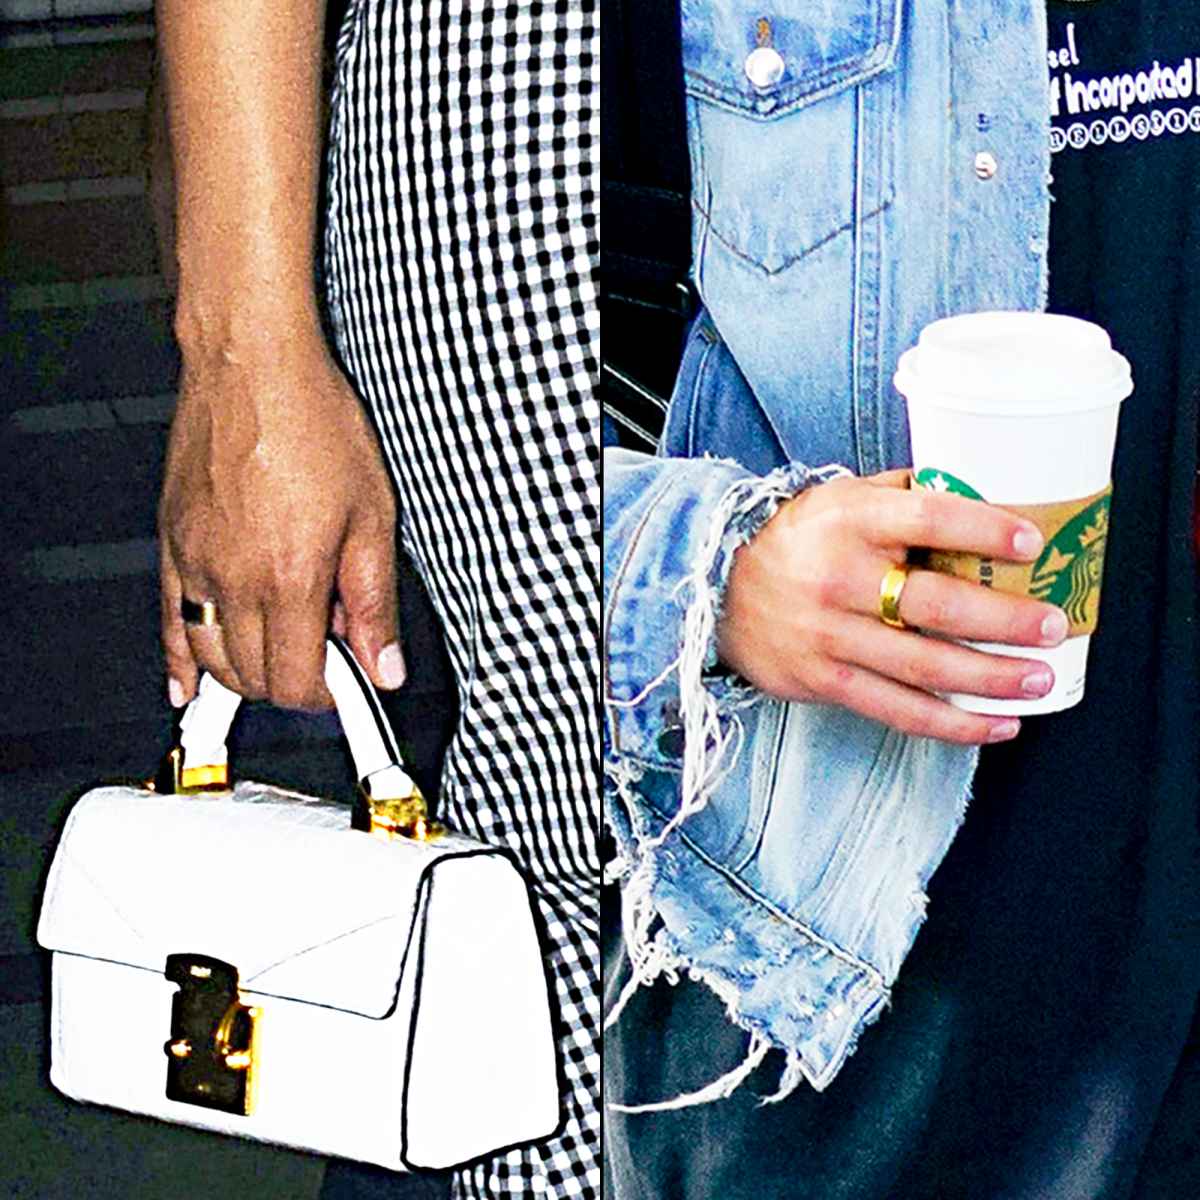 Louis Vuitton's newest It bag was just spotted on Selena Gomez, and we're  jealous. Check it out here.